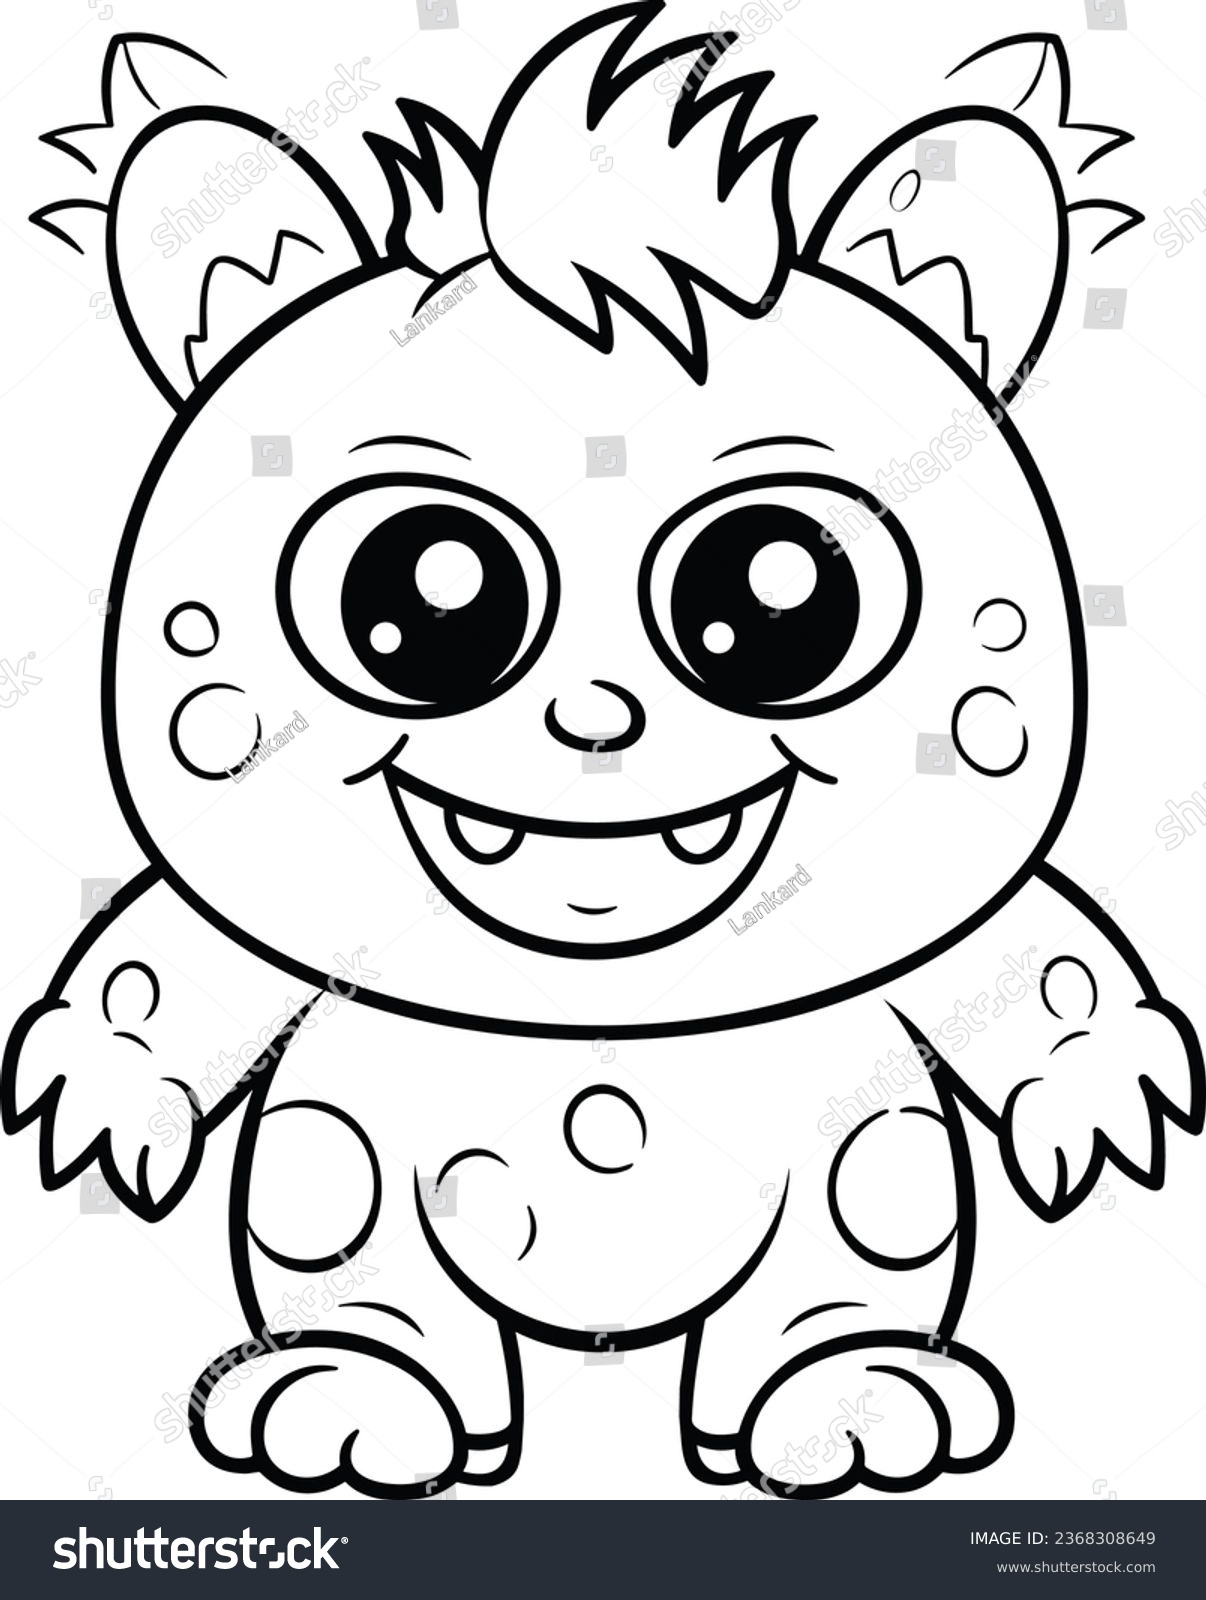 Funny little monster coloring page book stock vector royalty free